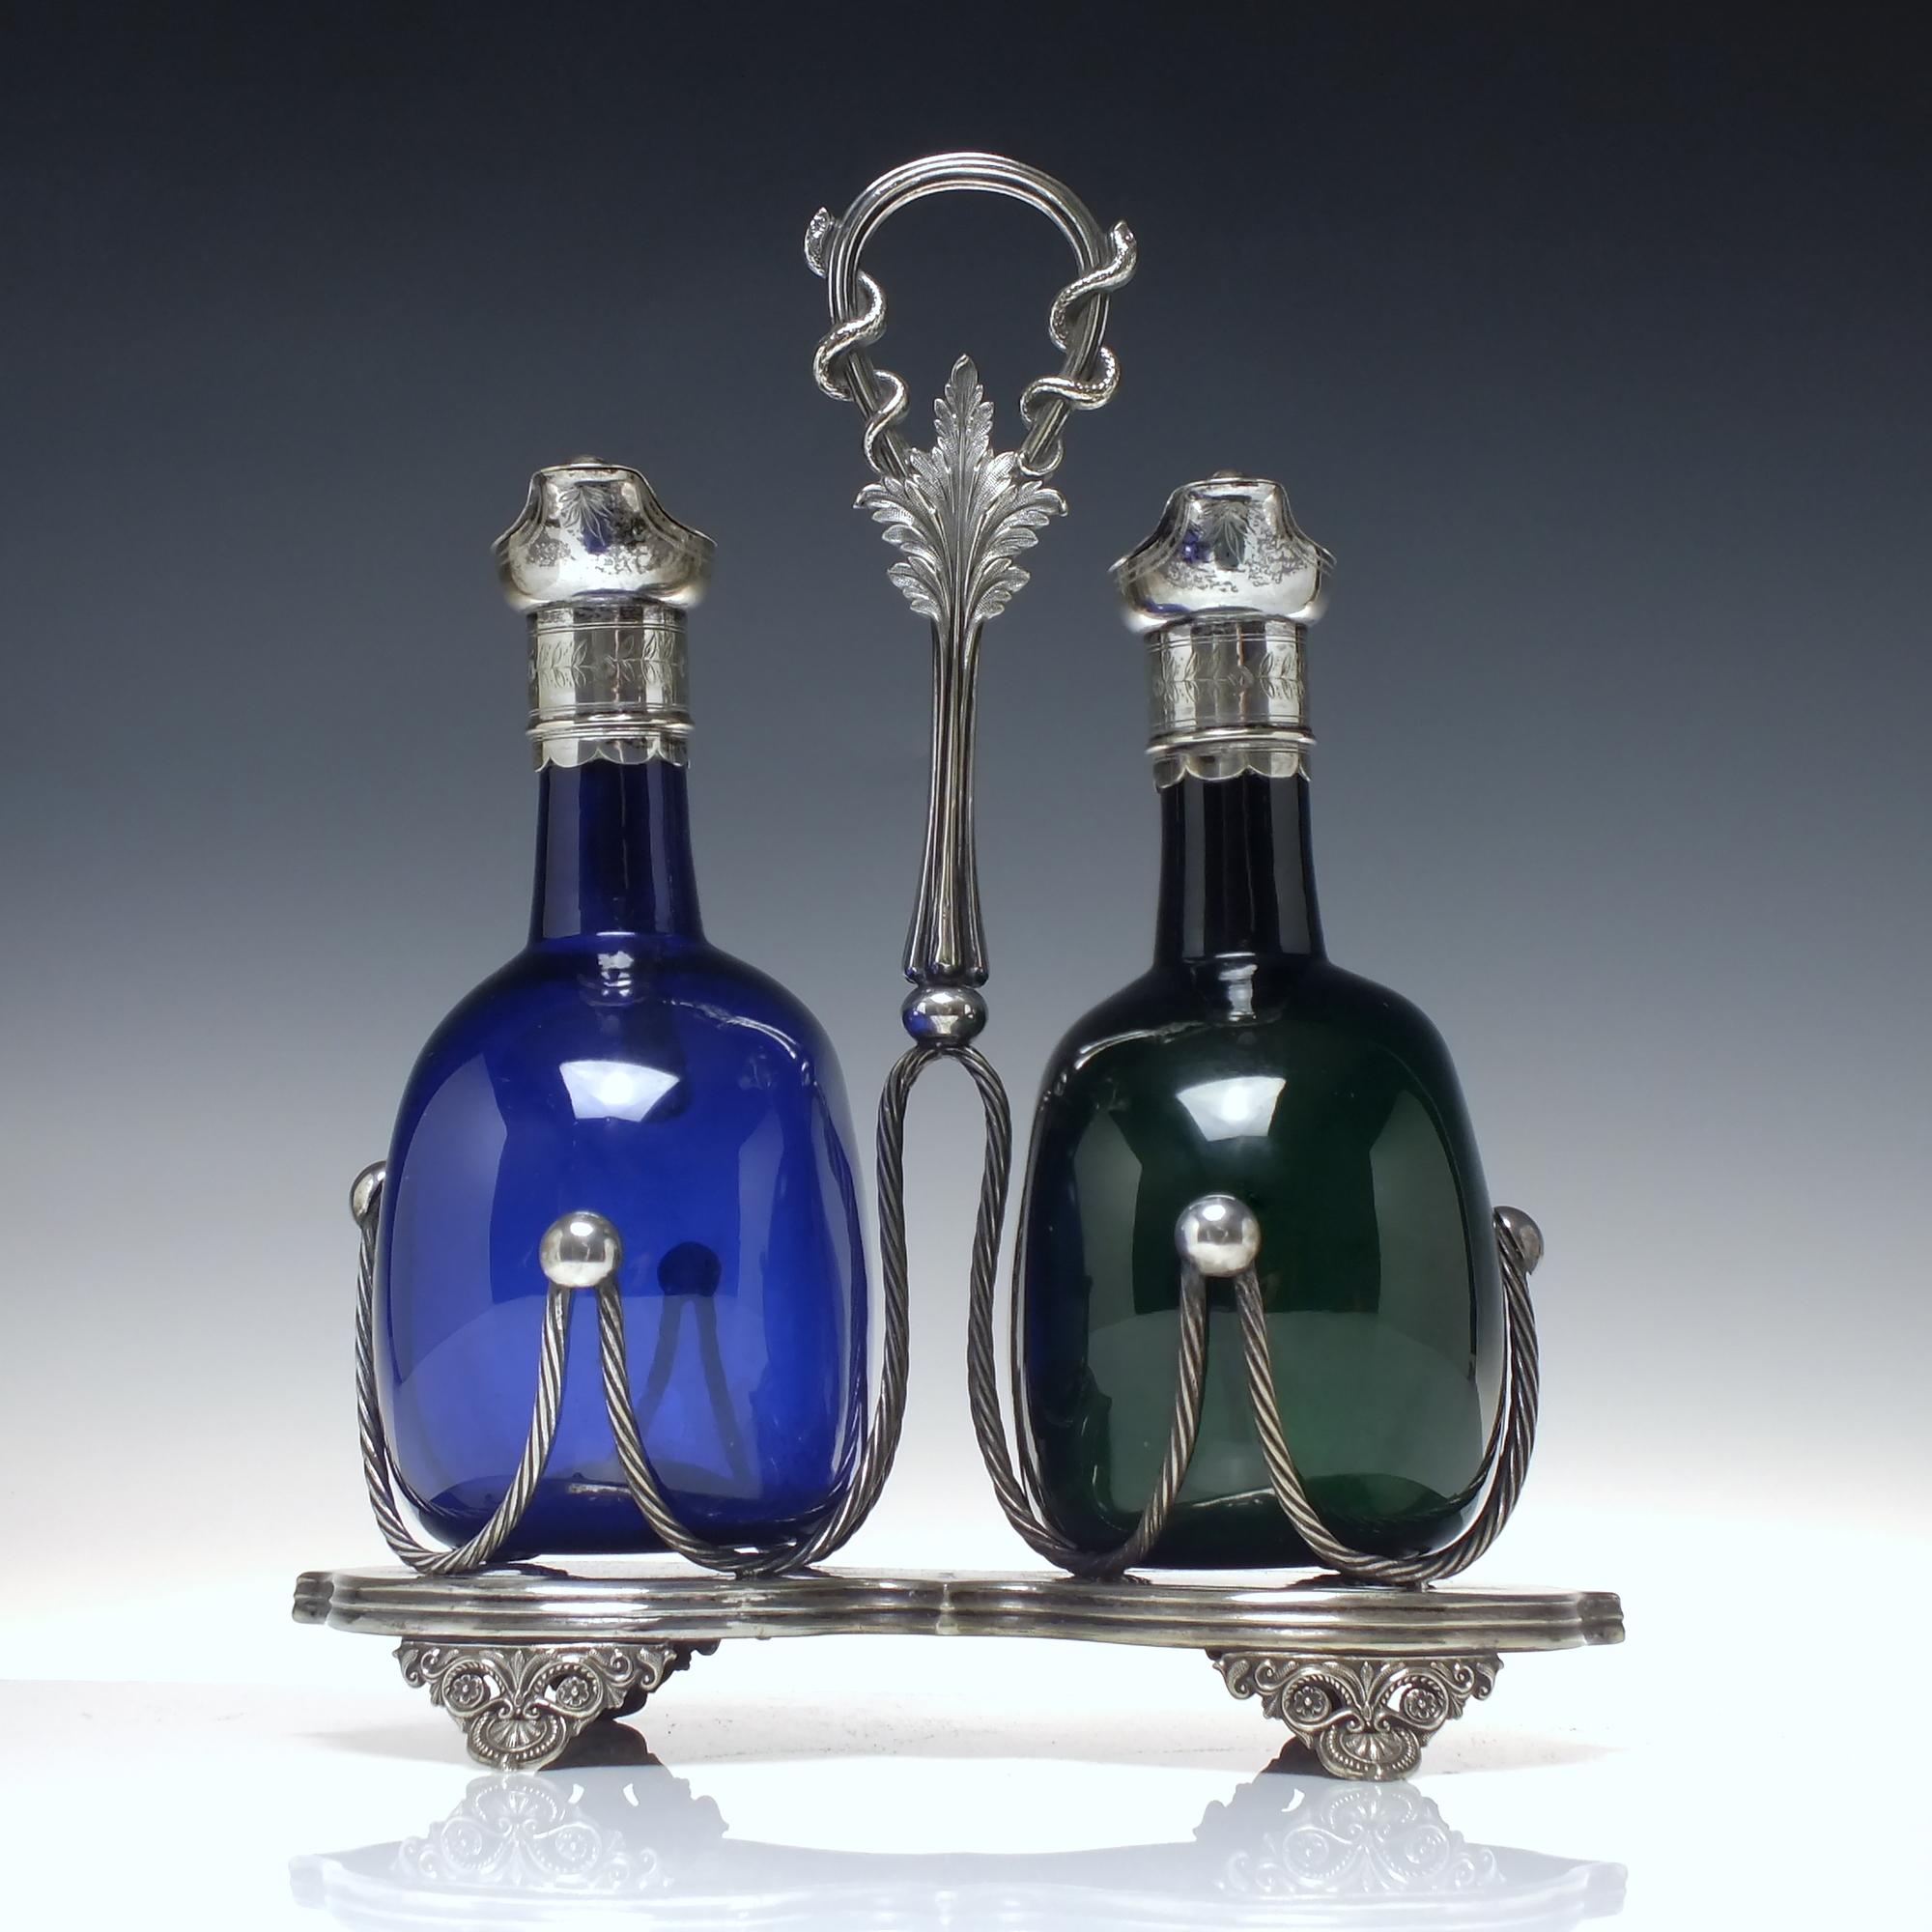 Technical Description 

A magnificent pair of Victorian Flaggons, one blue and one green with silver plated cap and lids with the original internal stoppers with silver plated caps. Applied handles and deep polished pontils. The silver-plated